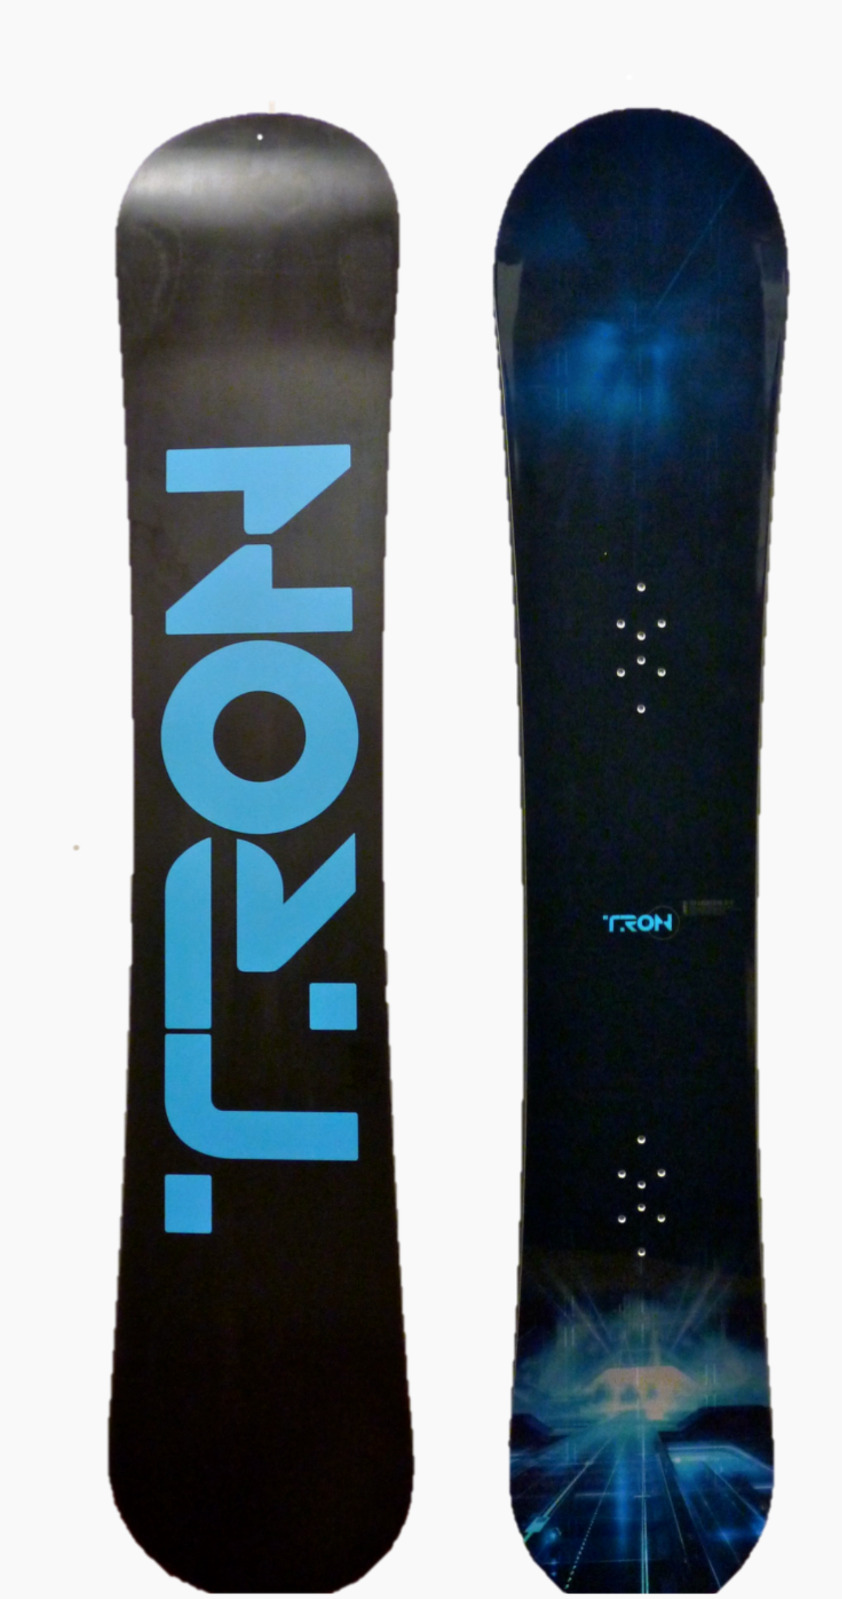 ULTRA RARE 2010 Tron Legacy film Limited Edition Snowboard Only One Ever On Ebay